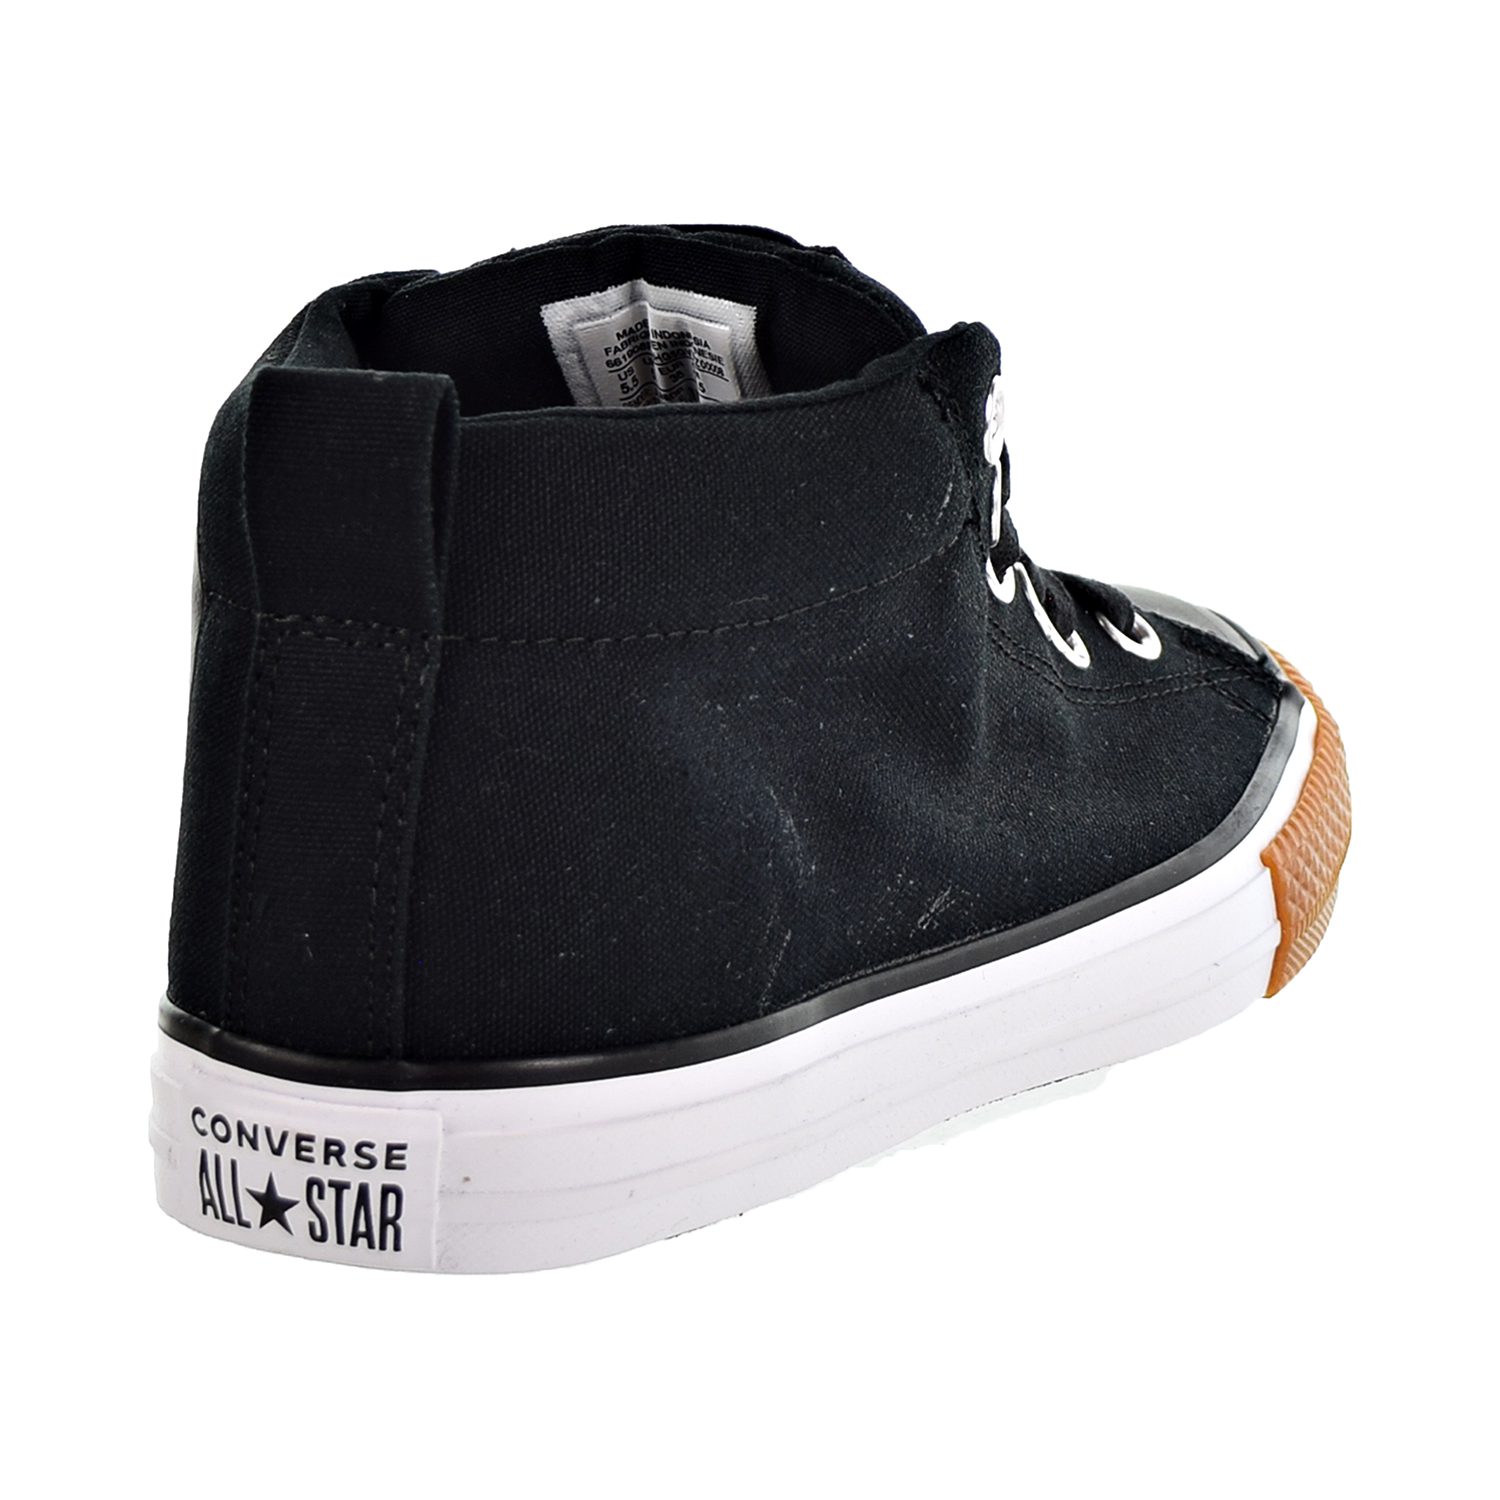 Converse Chuck Taylor All Star Street Mid Kids Shoes Black/Black/White 661908f - image 3 of 6